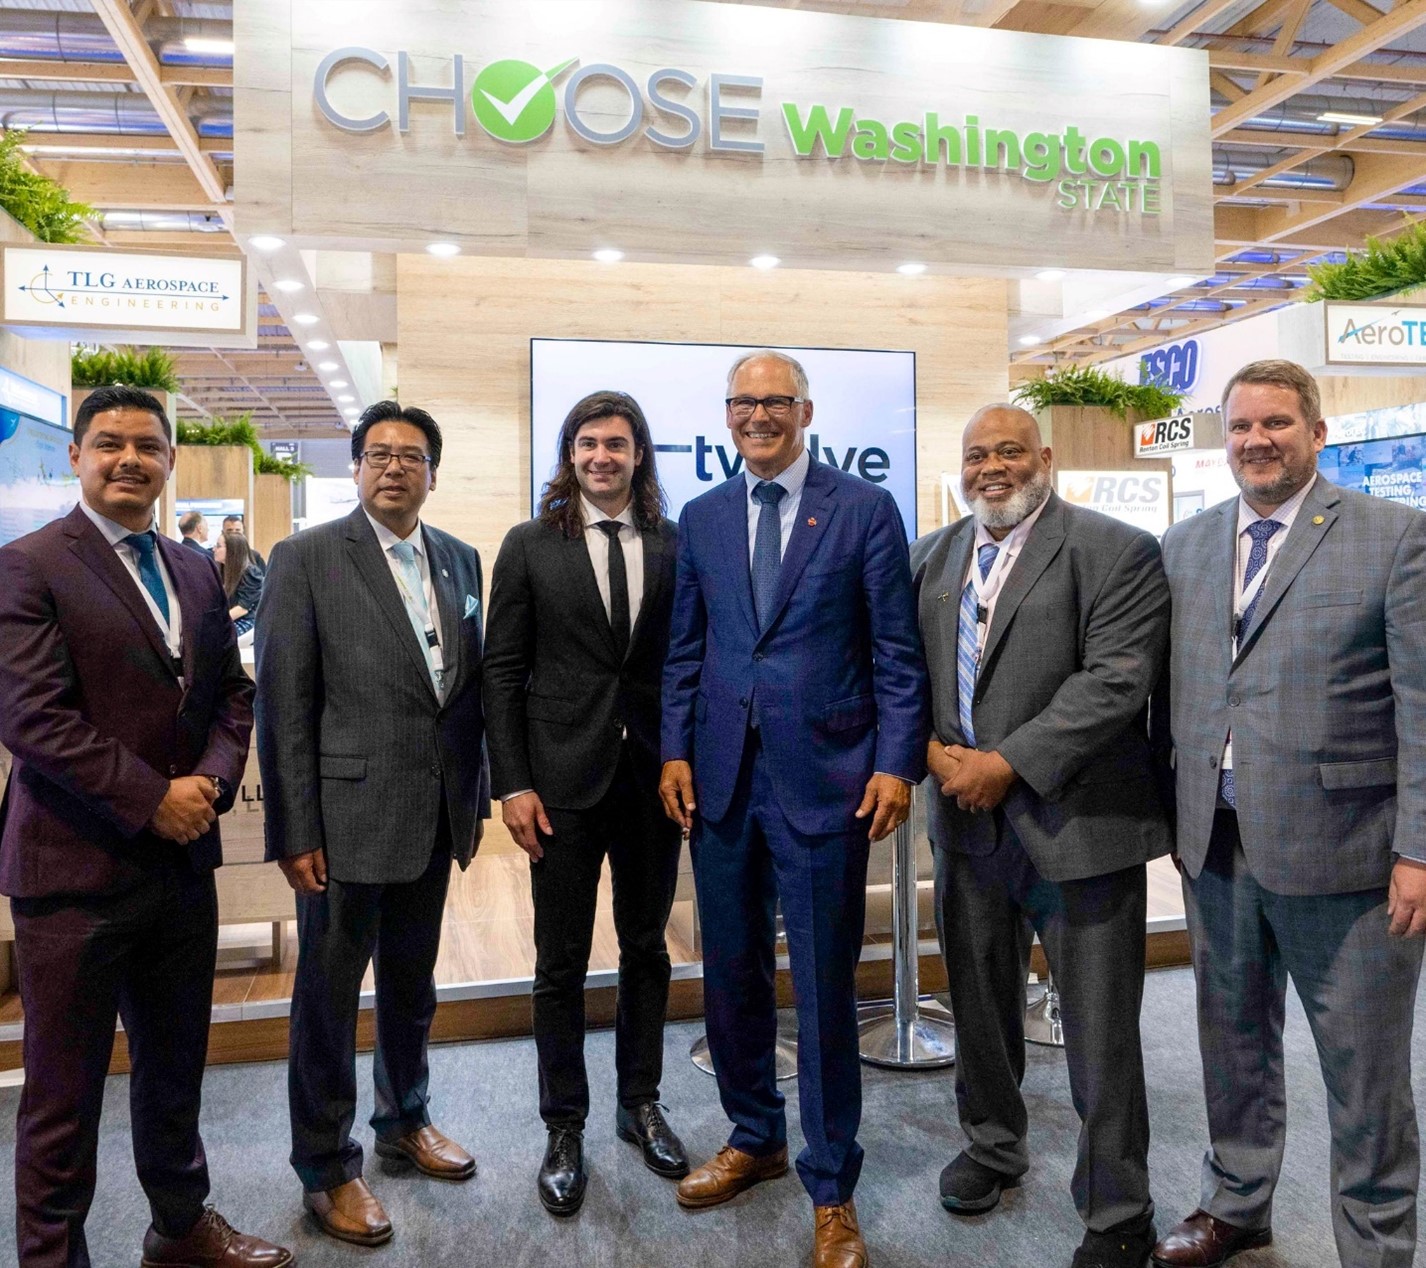 Rep. Cortes, legislative colleagues, and Gov. Inslee tour the ‘Choose WA’ booth at the Paris Air Show. (Credit Office of Governor)